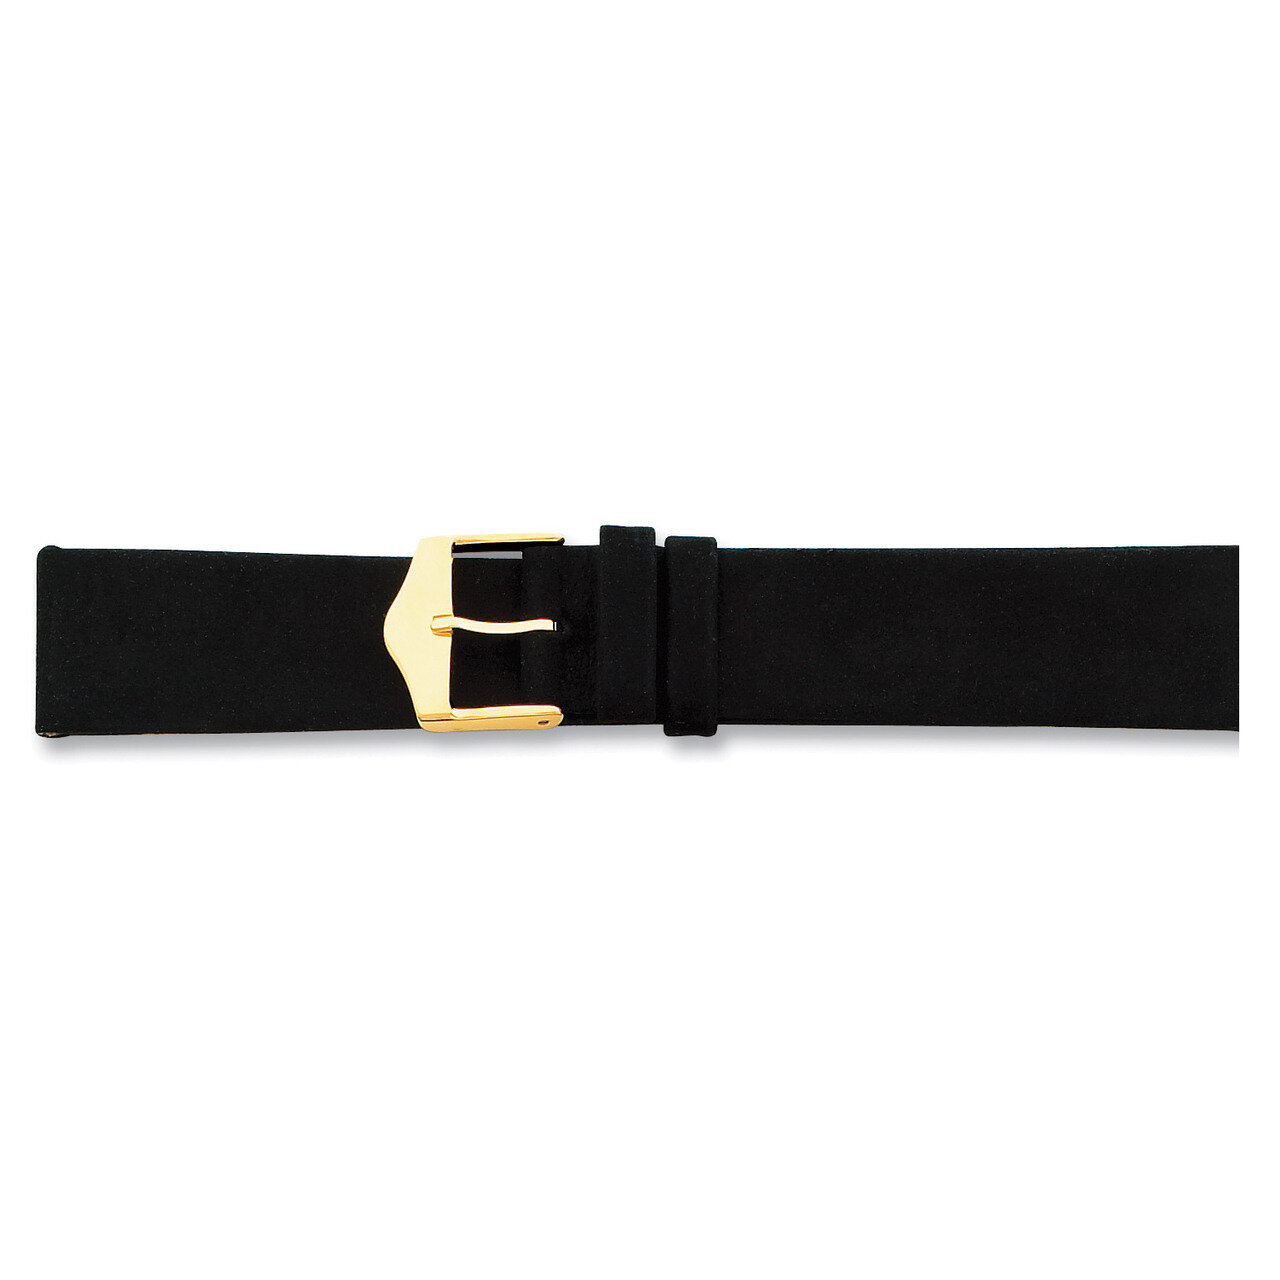 14mm Black Suede Leather Buckle Watch Band 6.75 Inch Gold-tone BA120-14